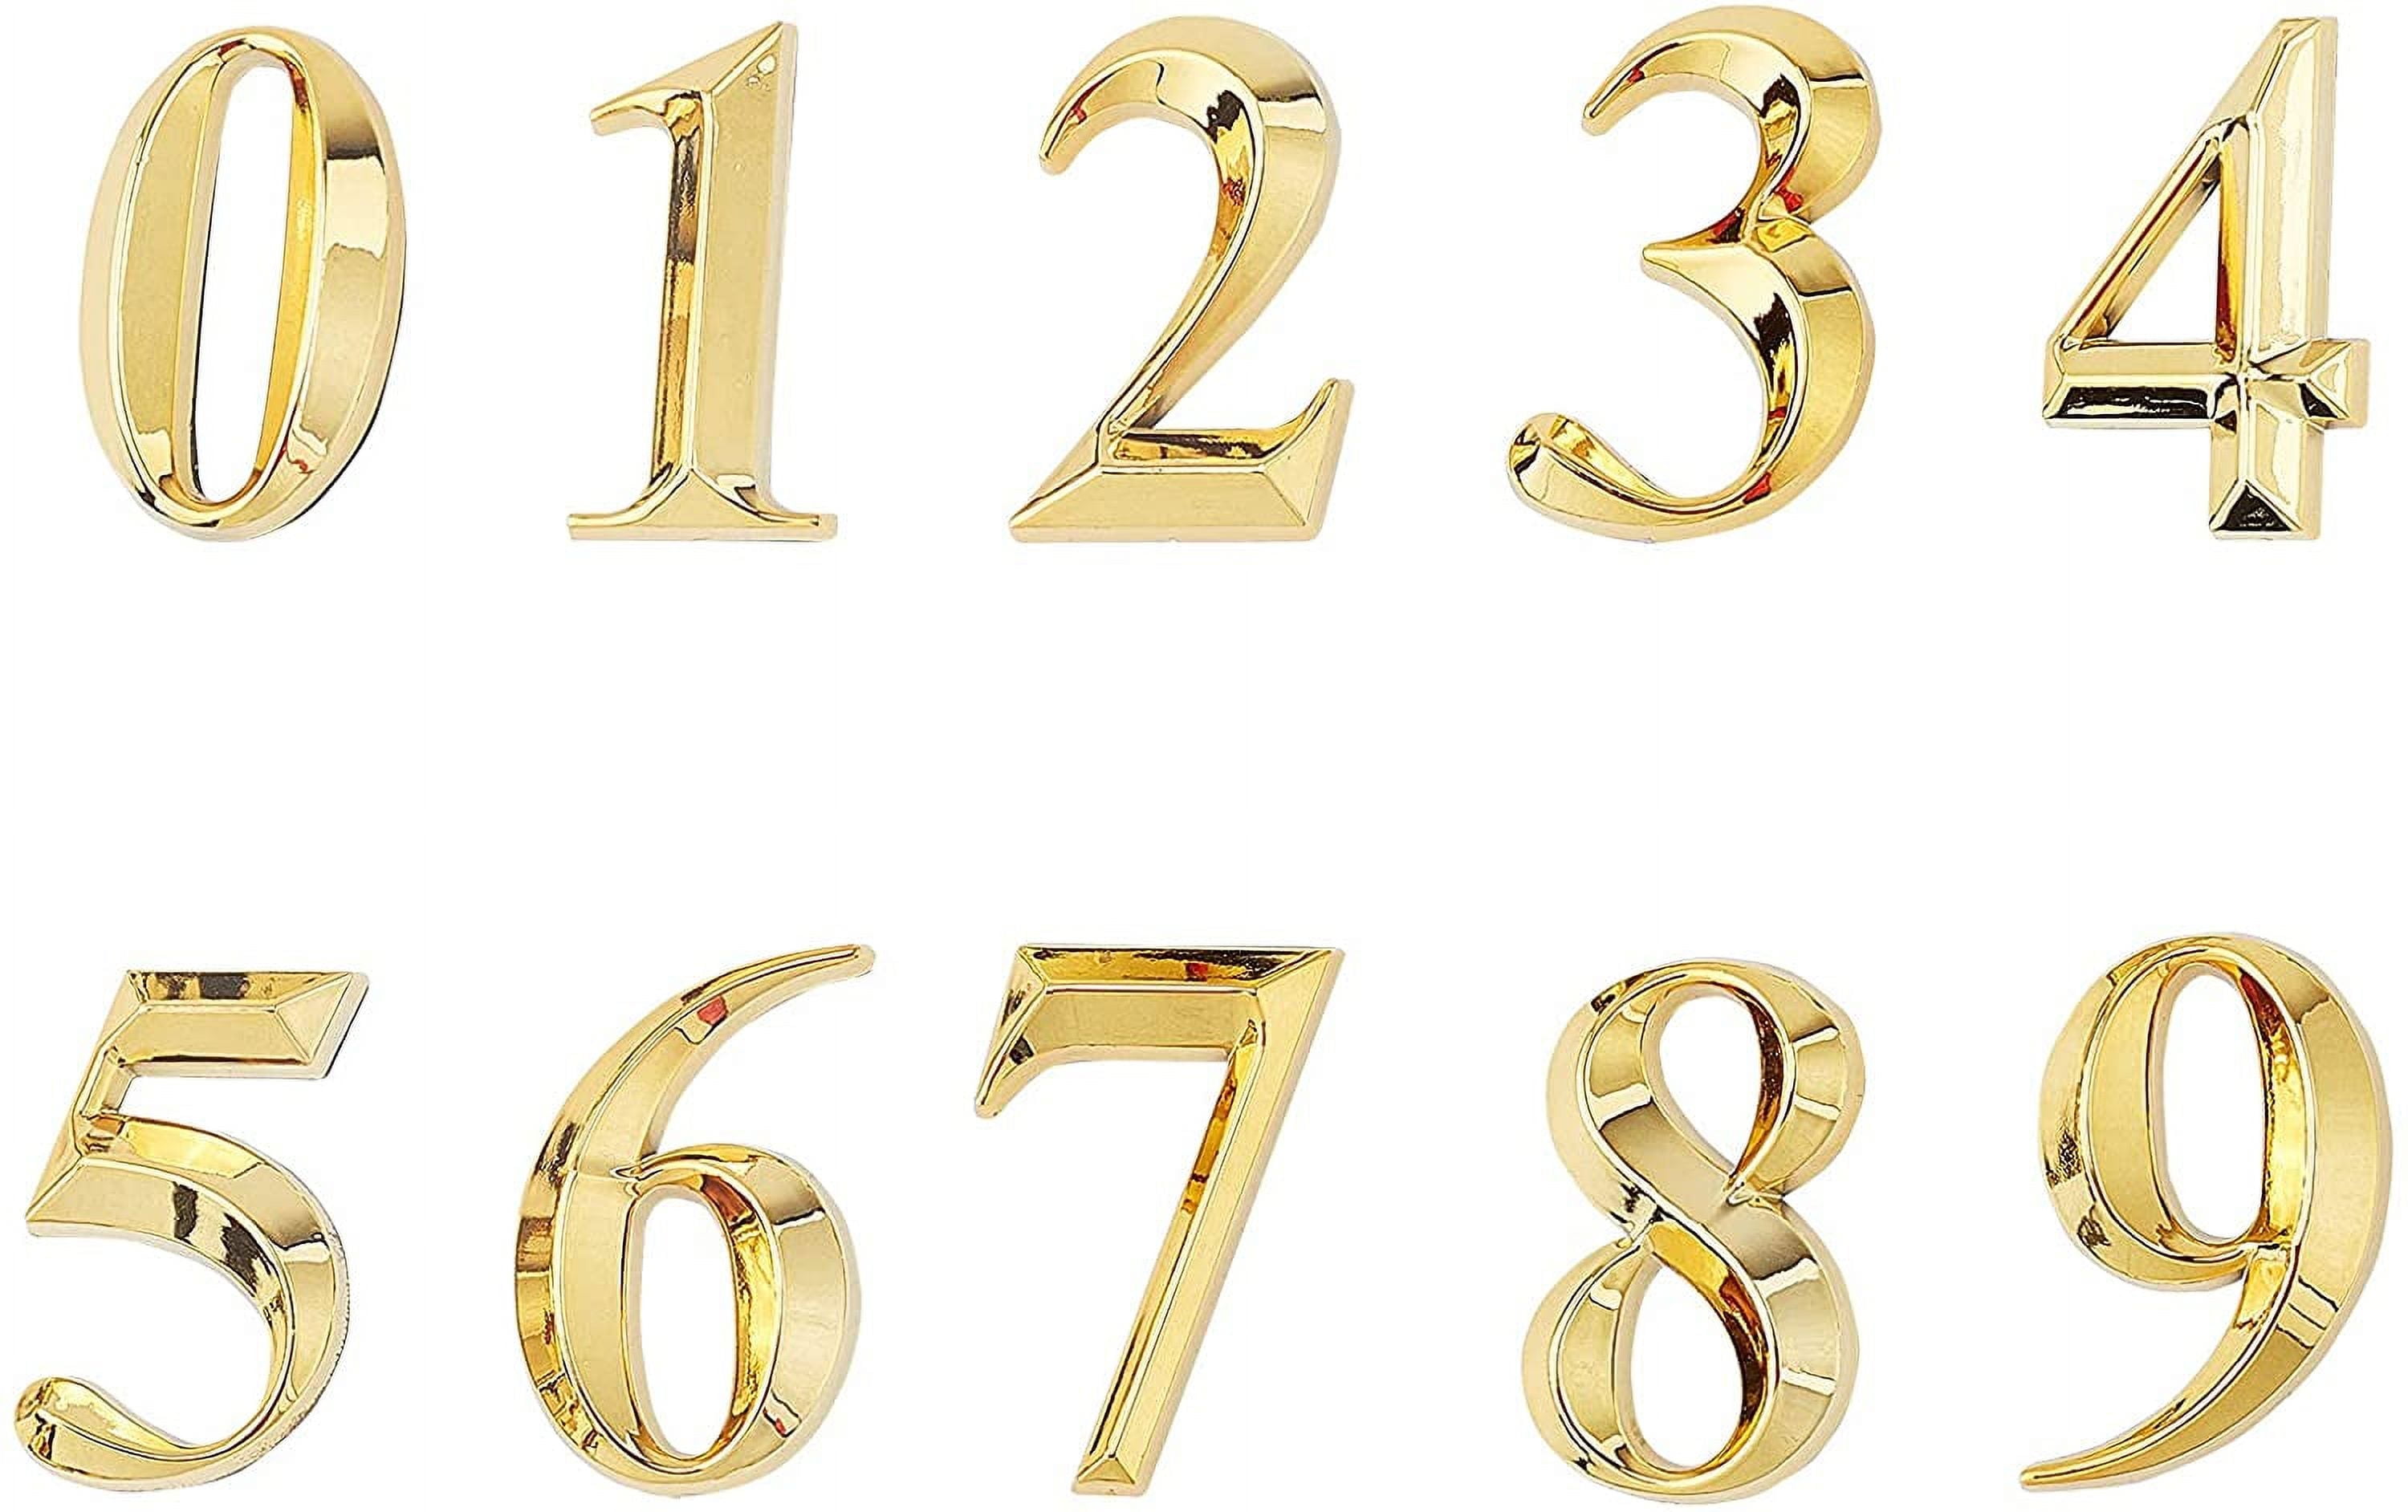 2 Inch House Numbers 3D self Adhesive Door Address Stickers Plaques ...